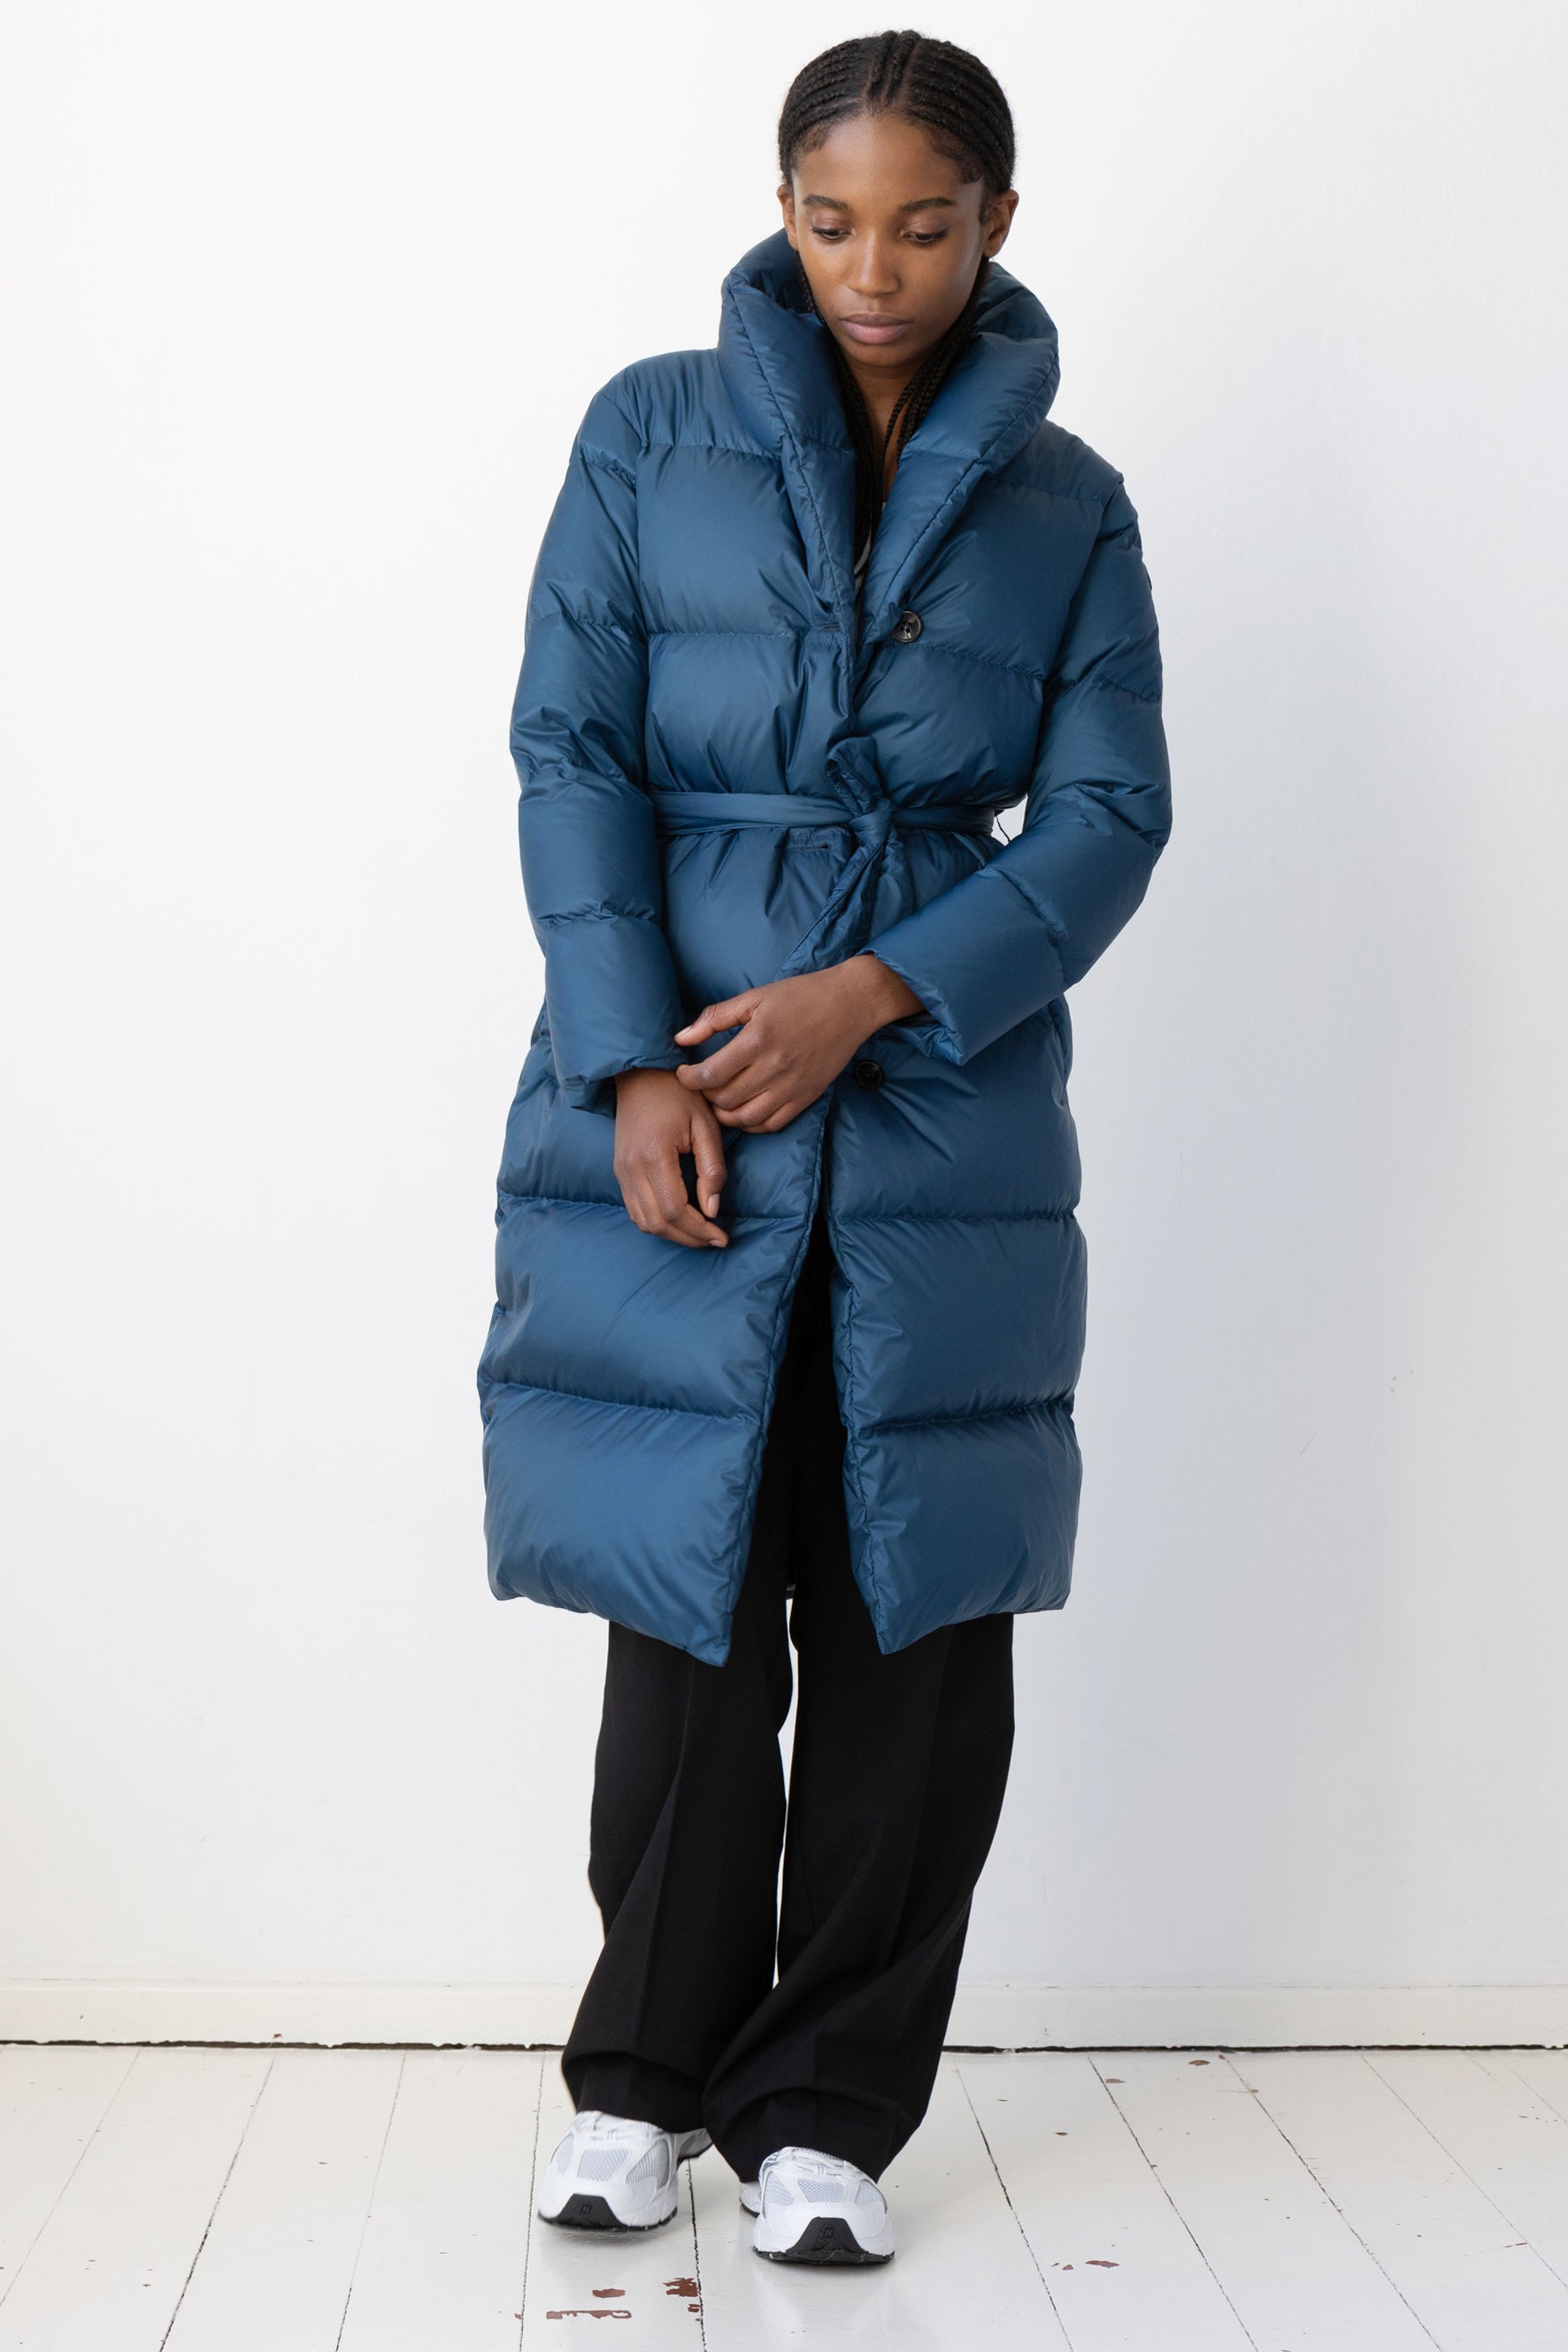 Lempelius belted down coat with shawl collar in color azure